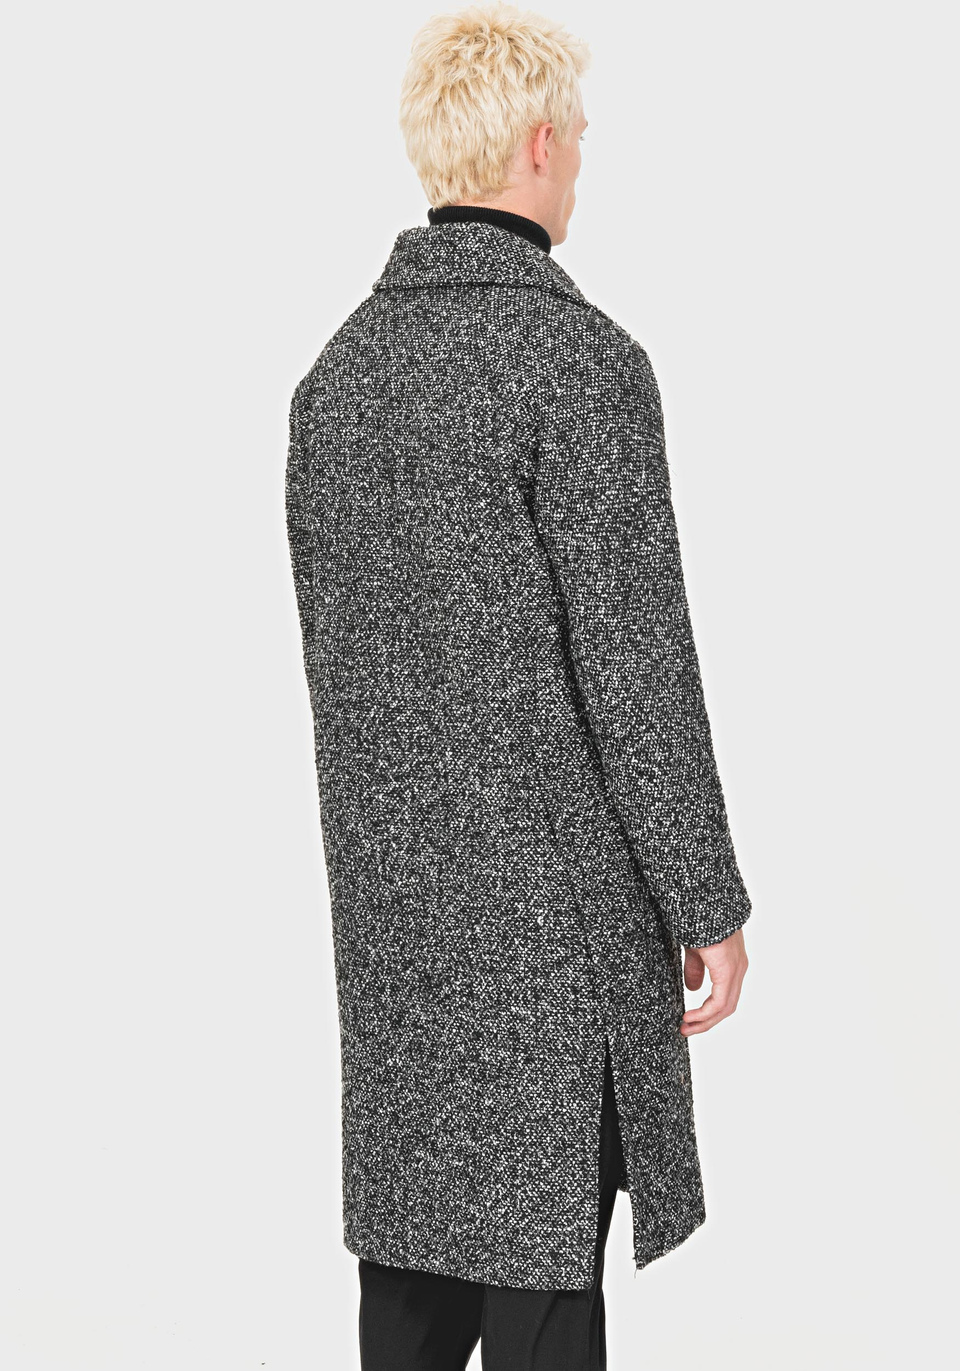 OVERSIZED DECONSTRUCTED COAT IN A TWO-TONE WOOL BLEND - Antony Morato Online Shop